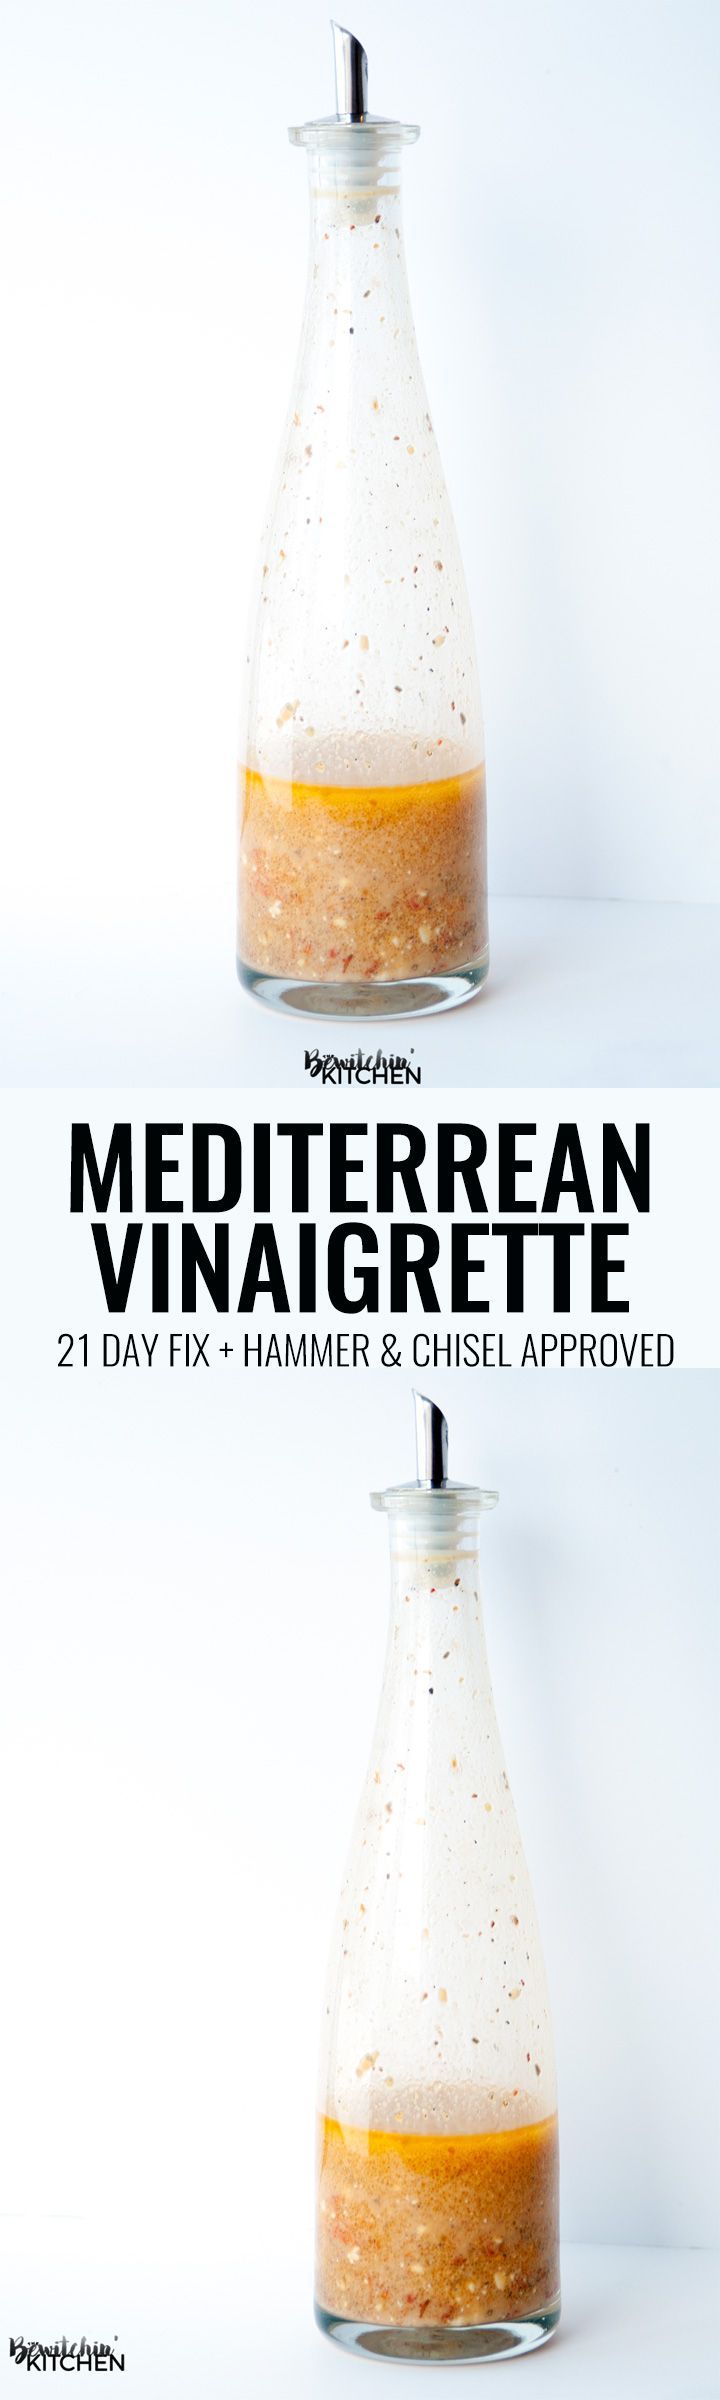 Mediterranean Vinaigrette –  healthy vinaigrette recipe to spice up your salads from the Hammer and Chisel cookbook. This is also